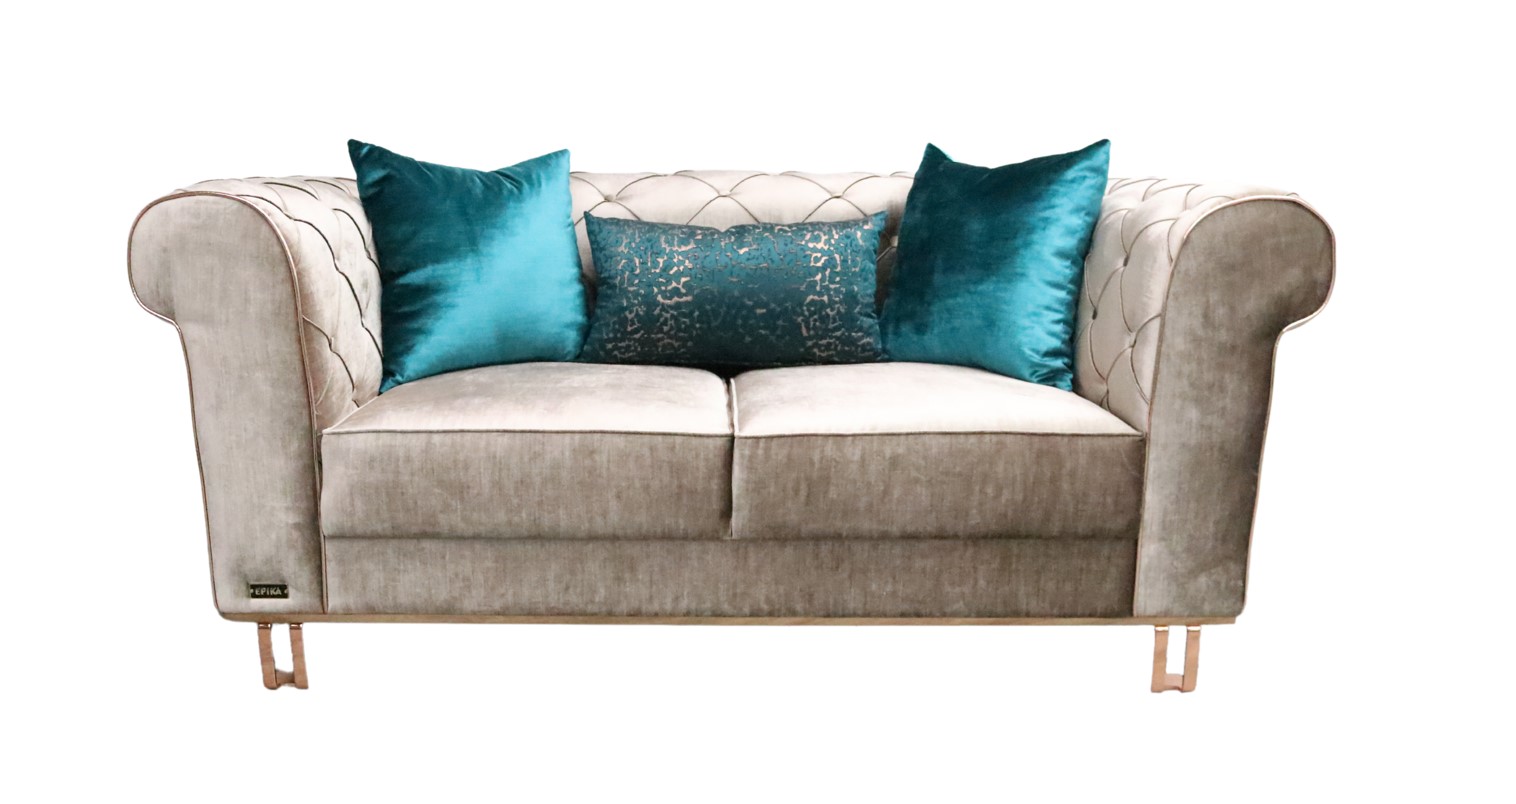 Discover the Charm of a Chesterfield Queen Anne Sofa  %Post Title